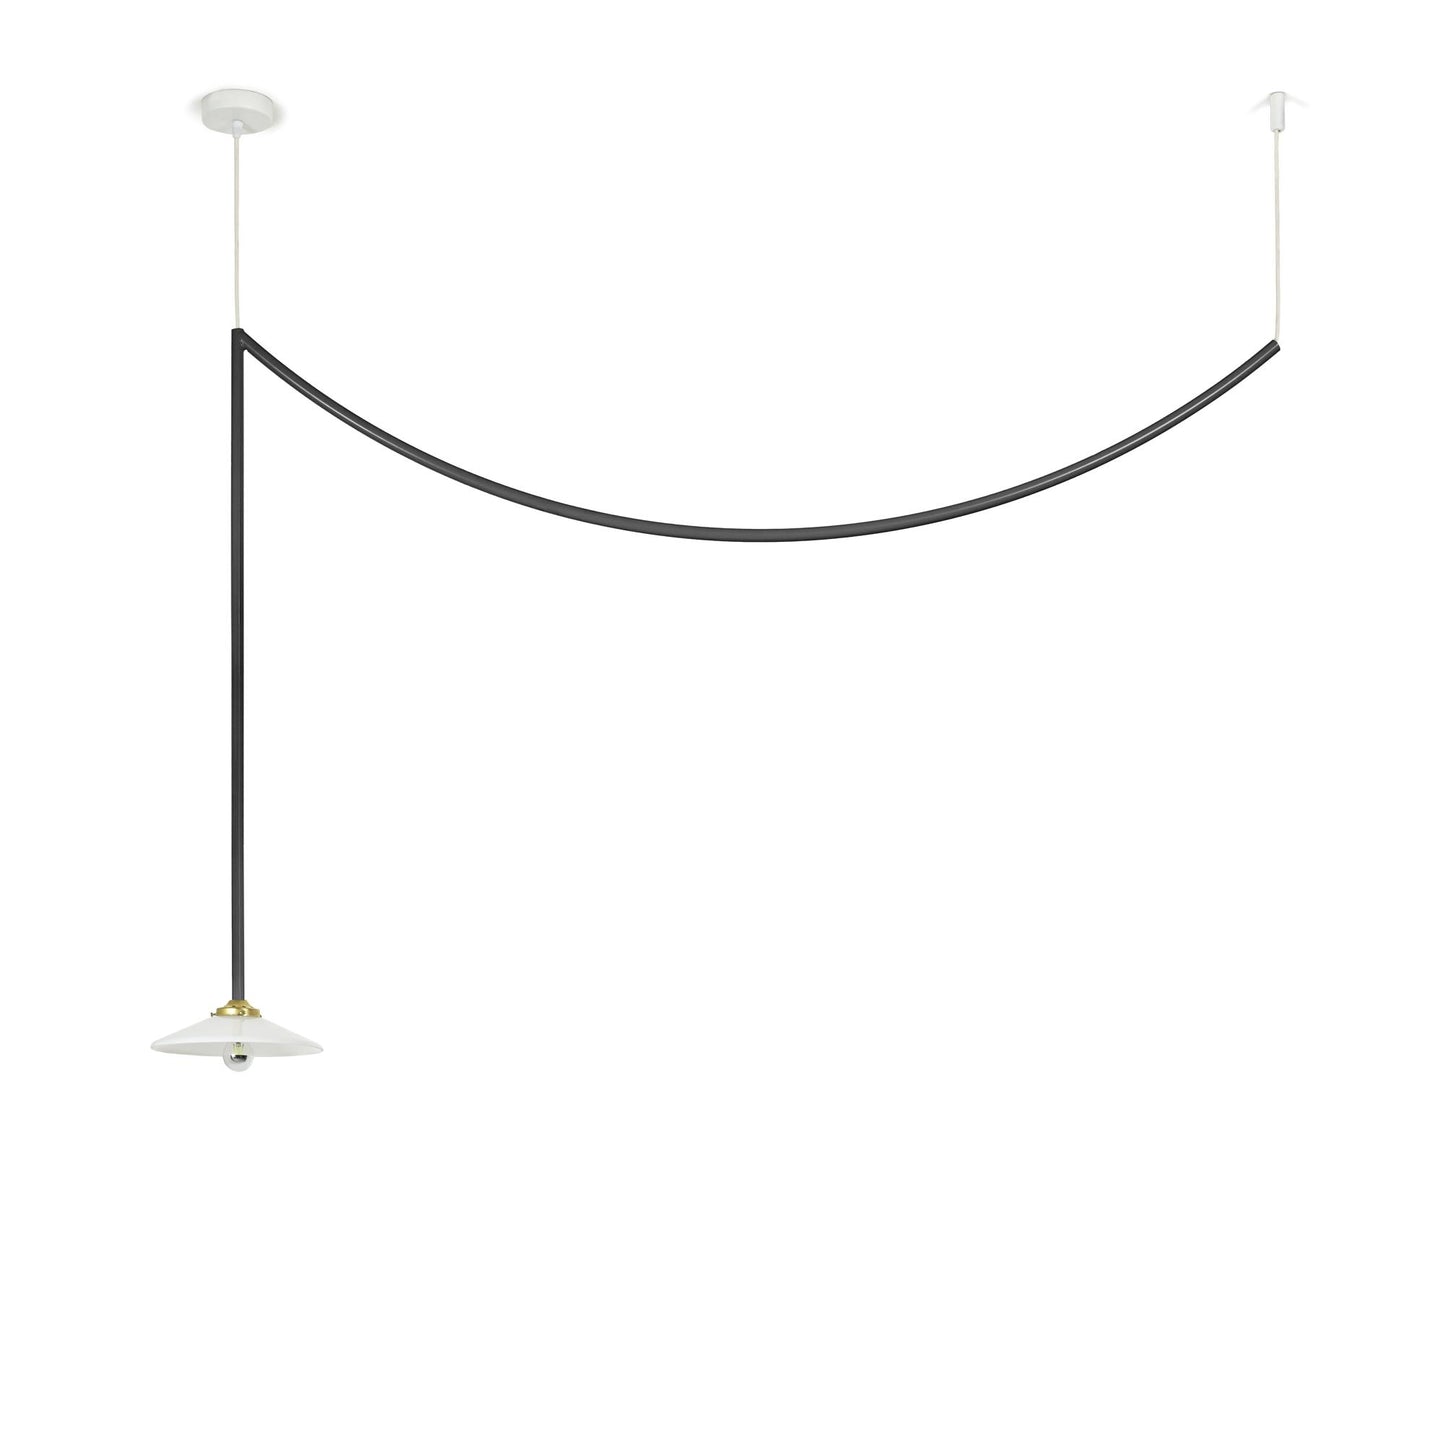 Ceiling Lamp N°4 Ceiling Light by Valerie Objects #Black